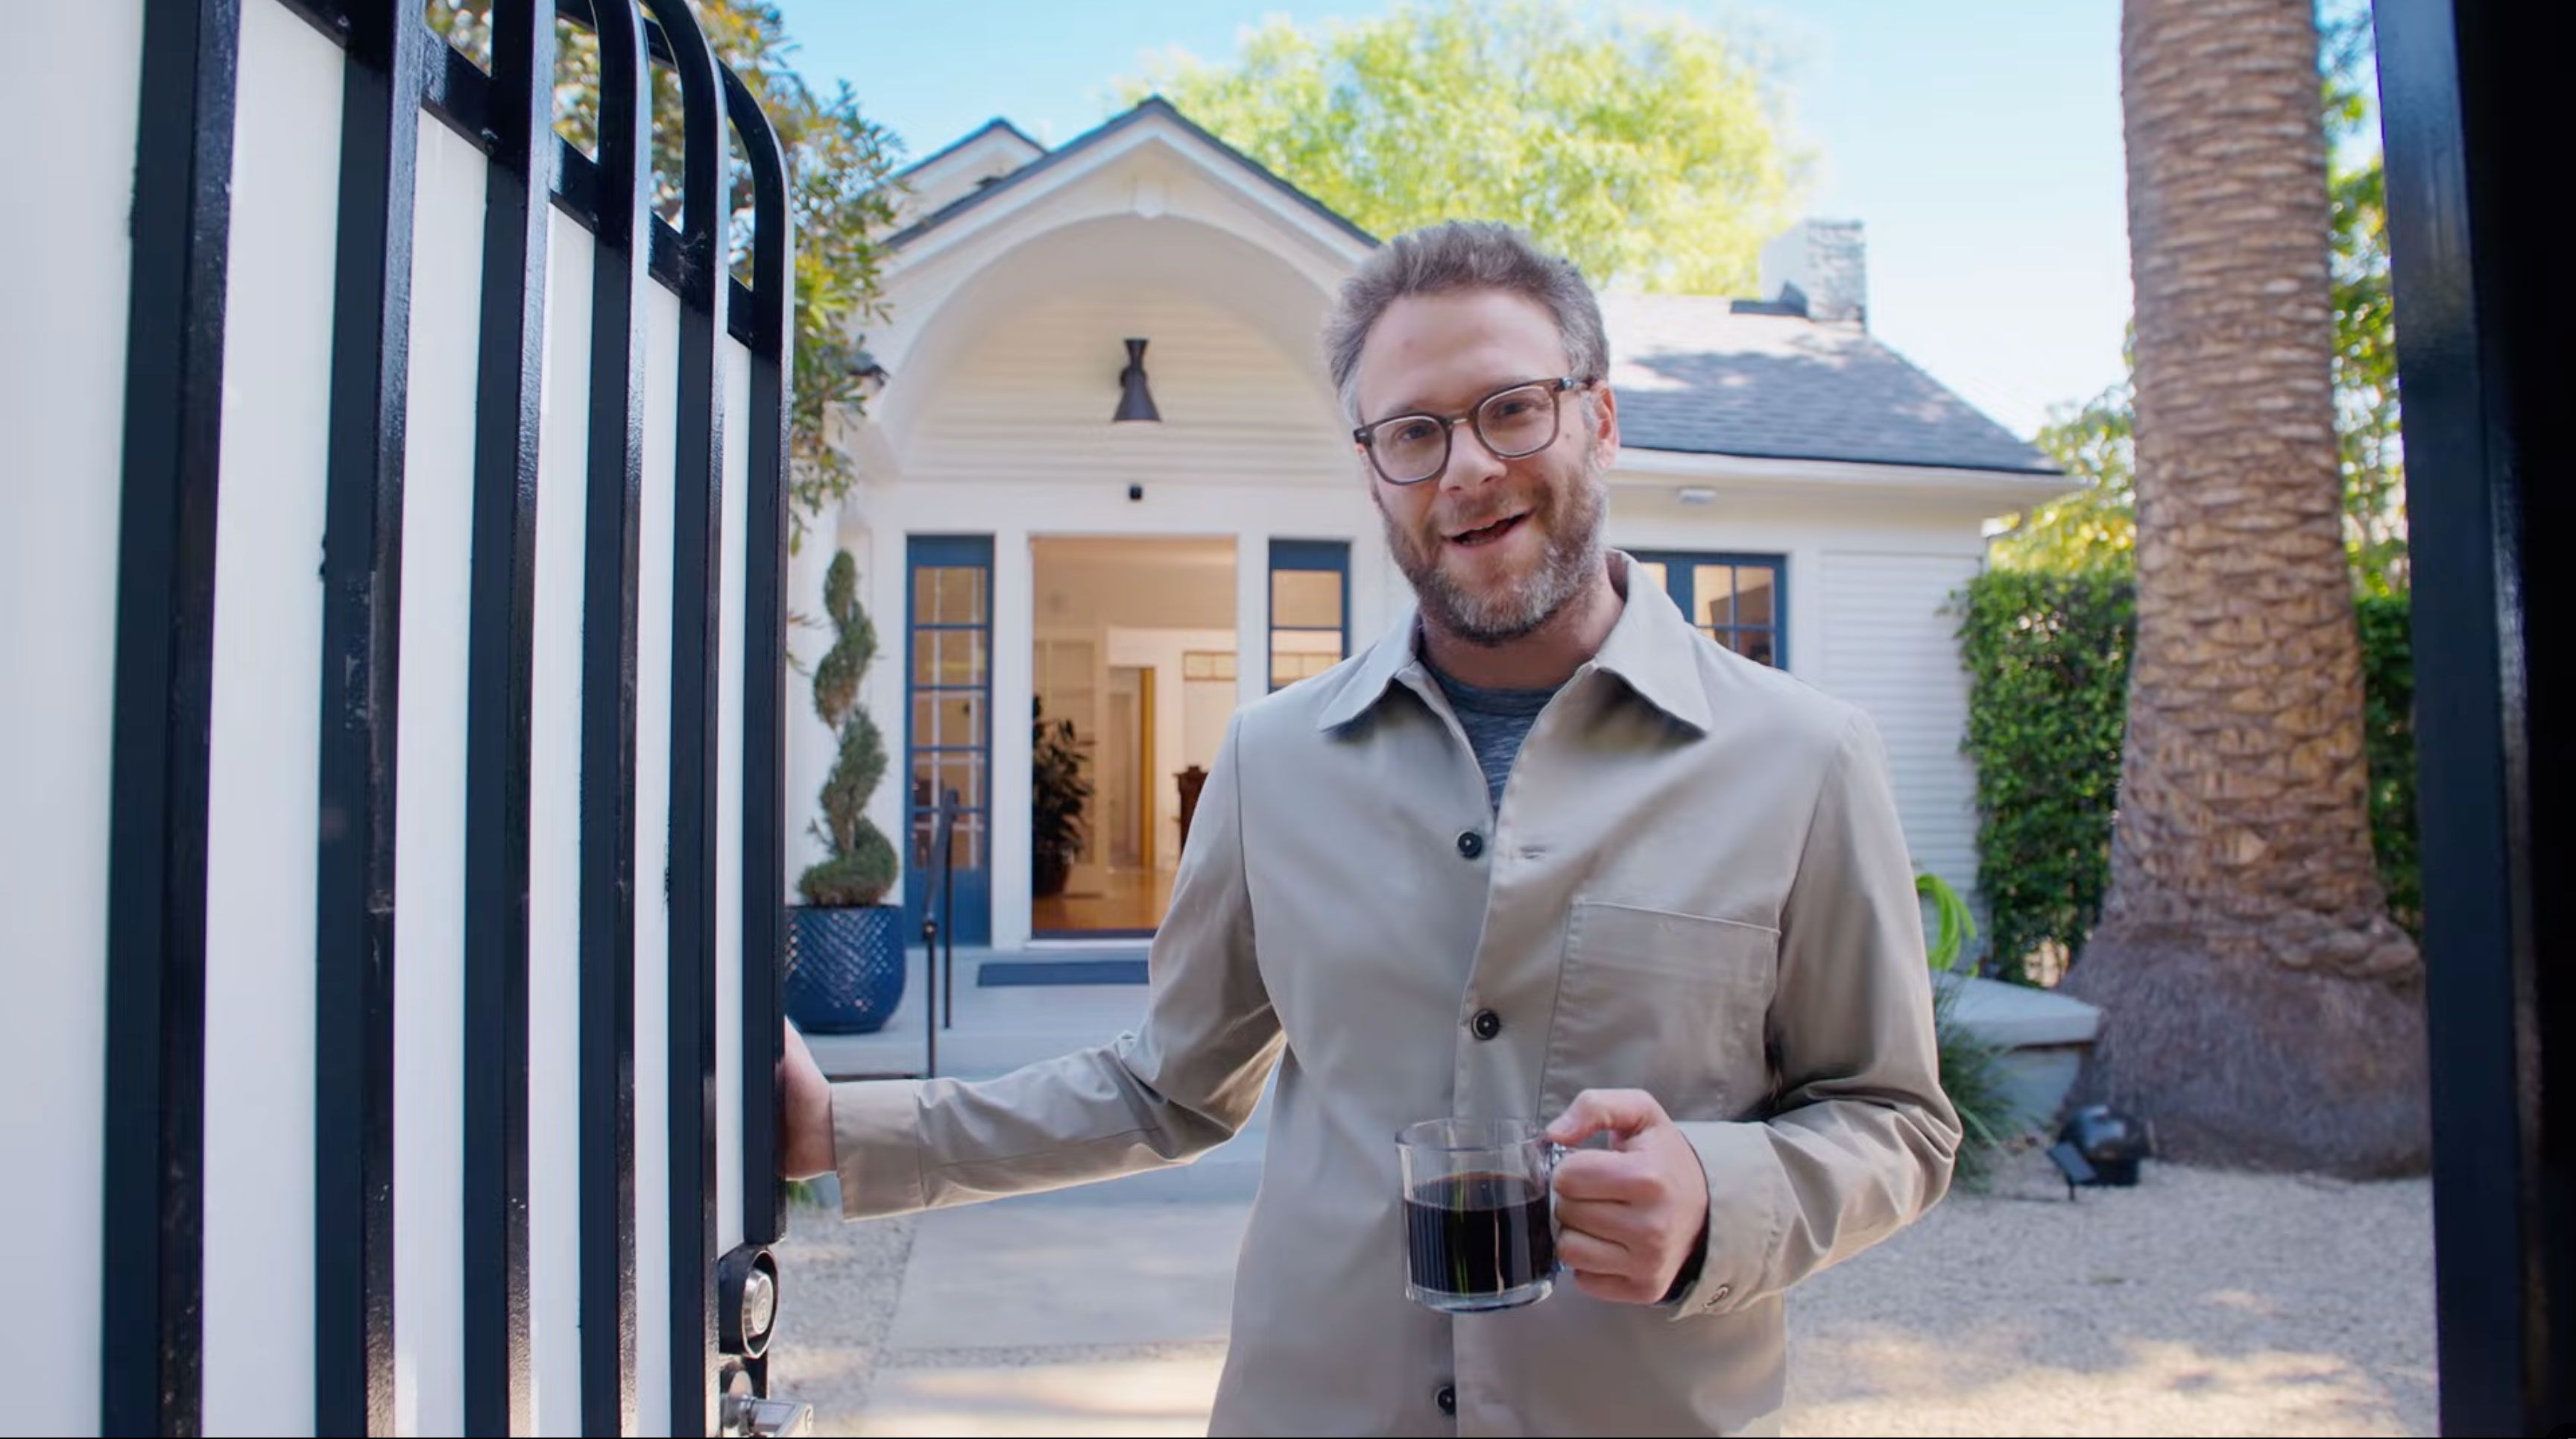 Seth Rogen gave a tour of his Houseplant offices in April last year